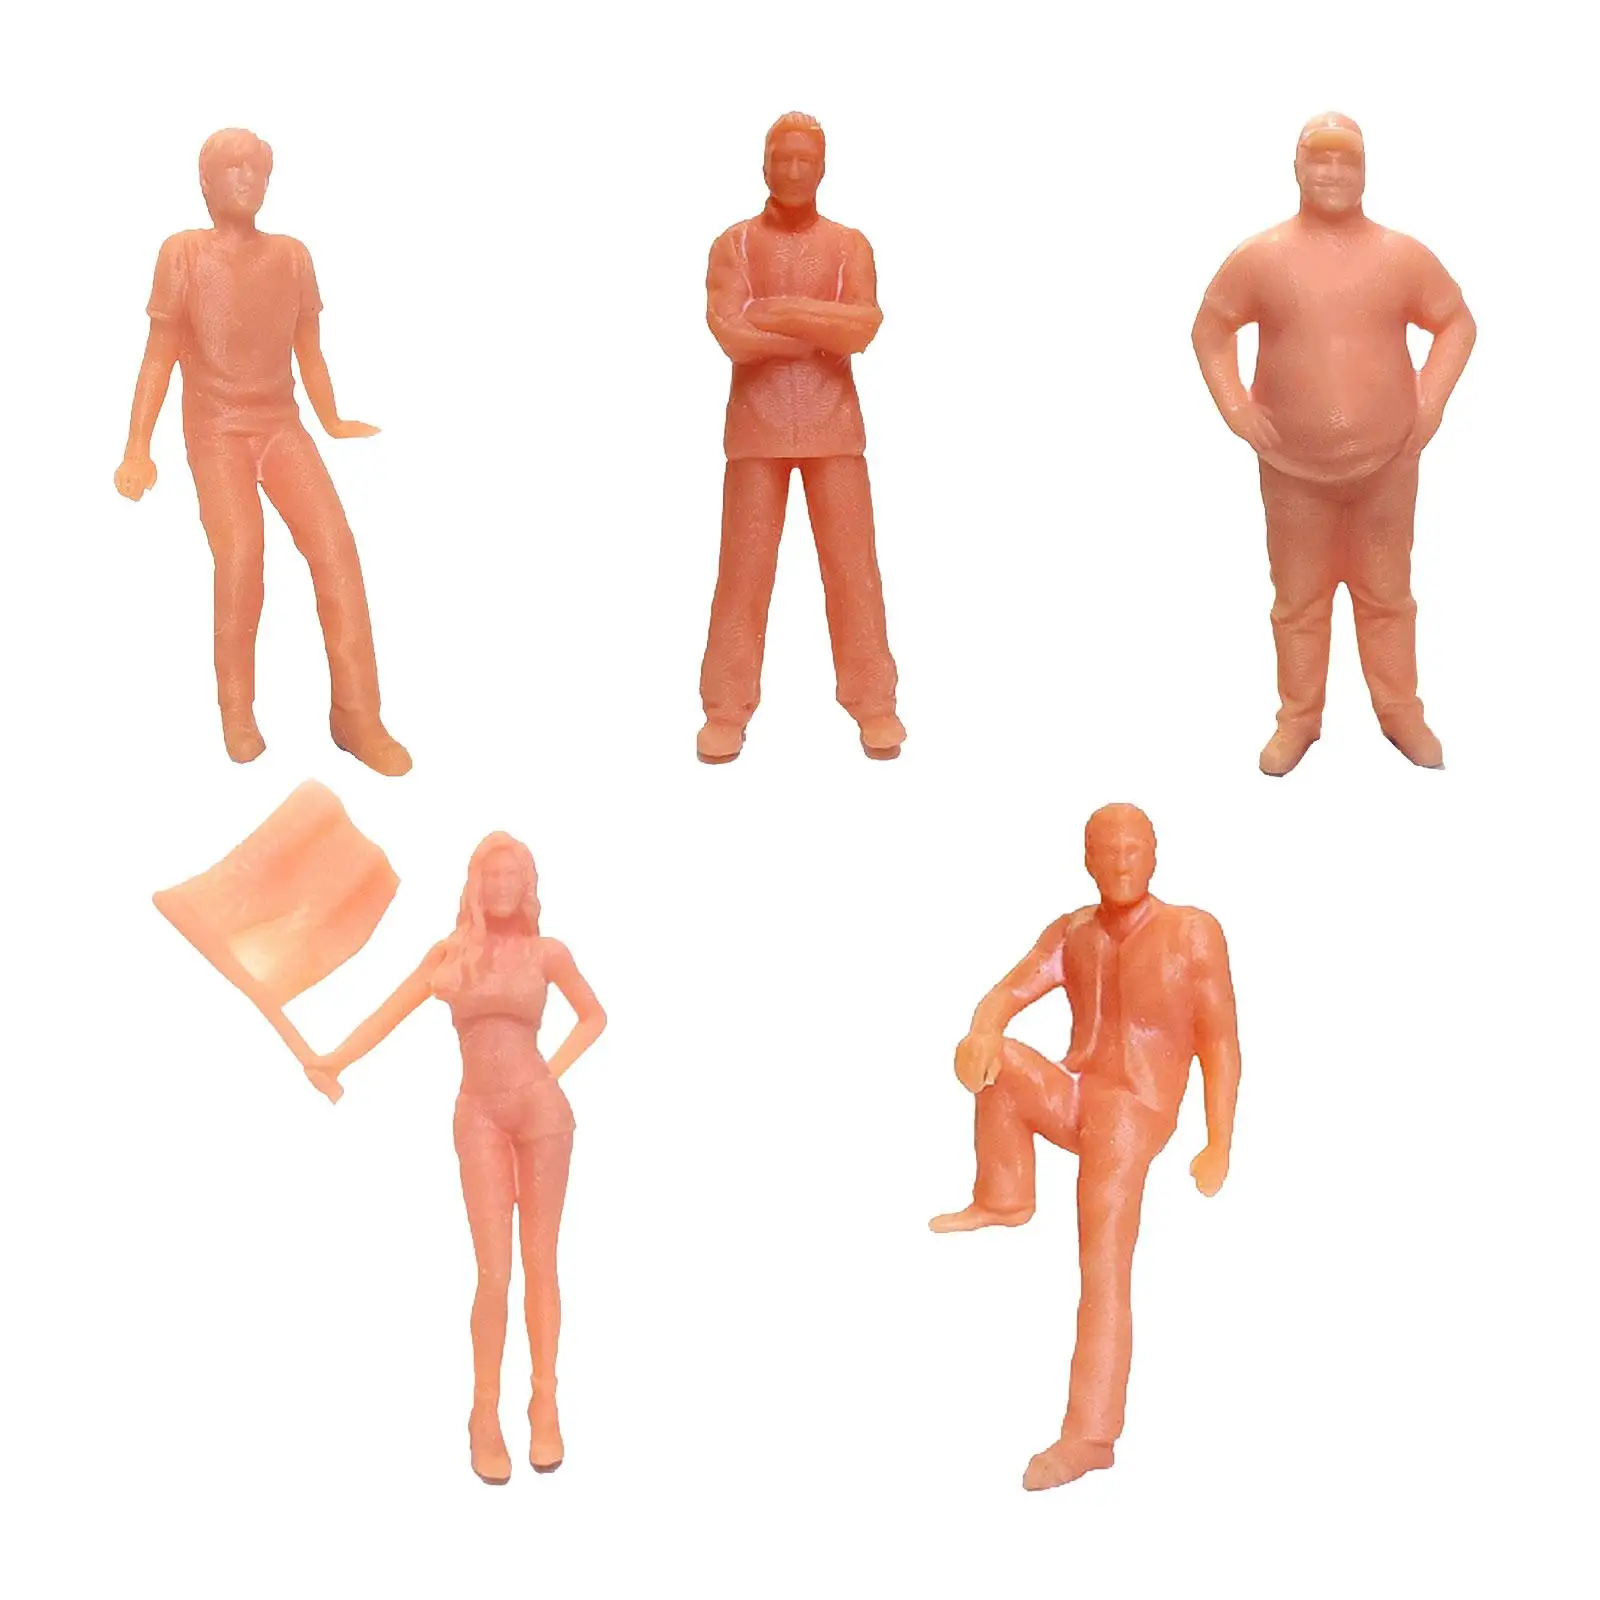 5 Pieces 1:64 Model People Figures Miniature People for Sand Table Architectural Layout Project Fairy Garden Micro Landscape